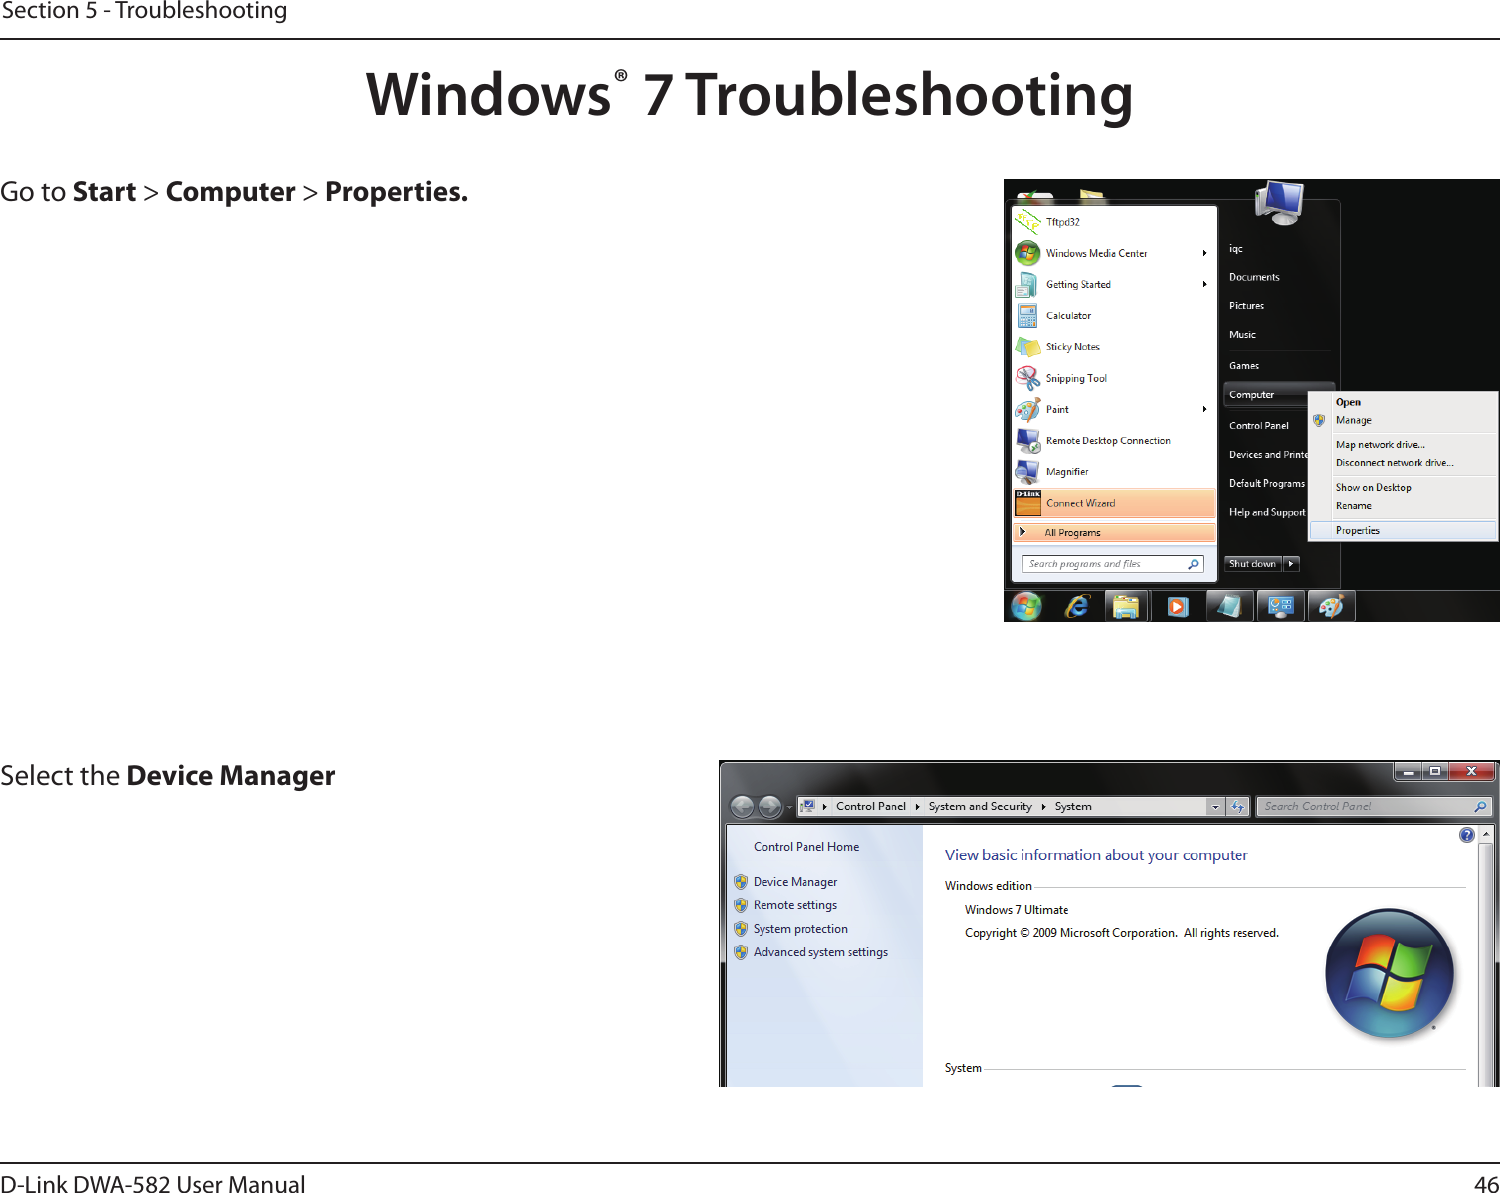 46D-Link DWA-582 User ManualSection 5 - TroubleshootingWindows® 7 TroubleshootingGo to Start &gt; Computer &gt; Properties.Select the Device Manager